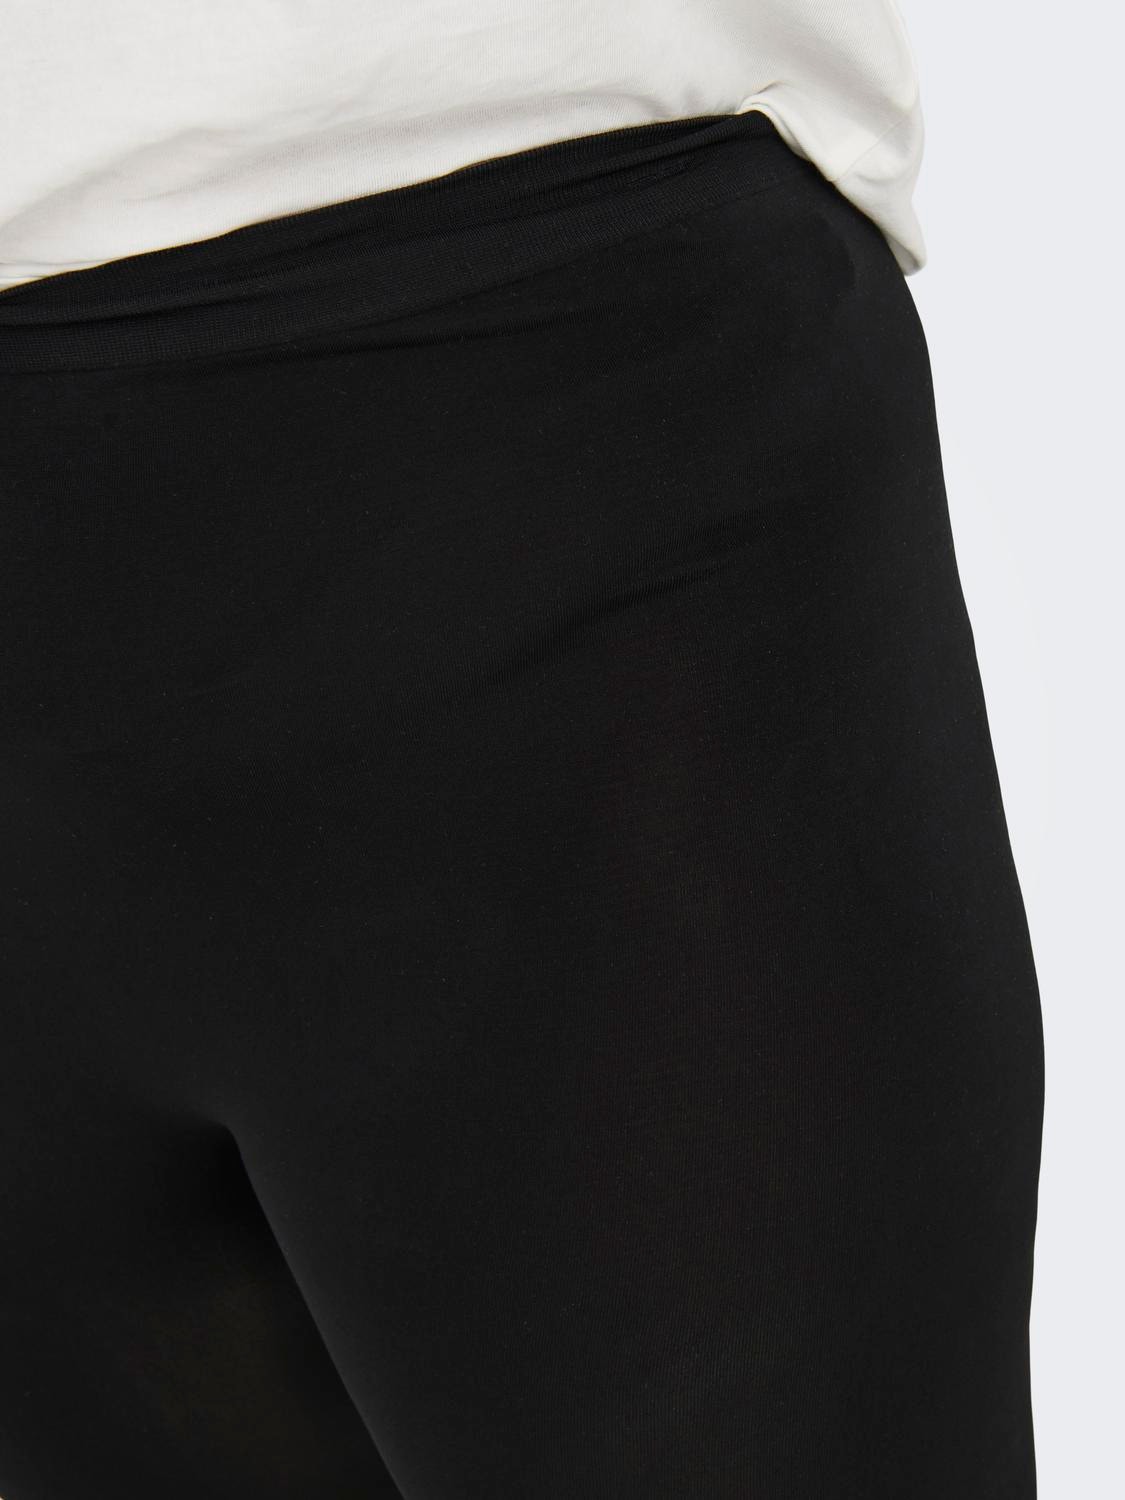 ONLY Shorts Tight Fit -Black - 15294672